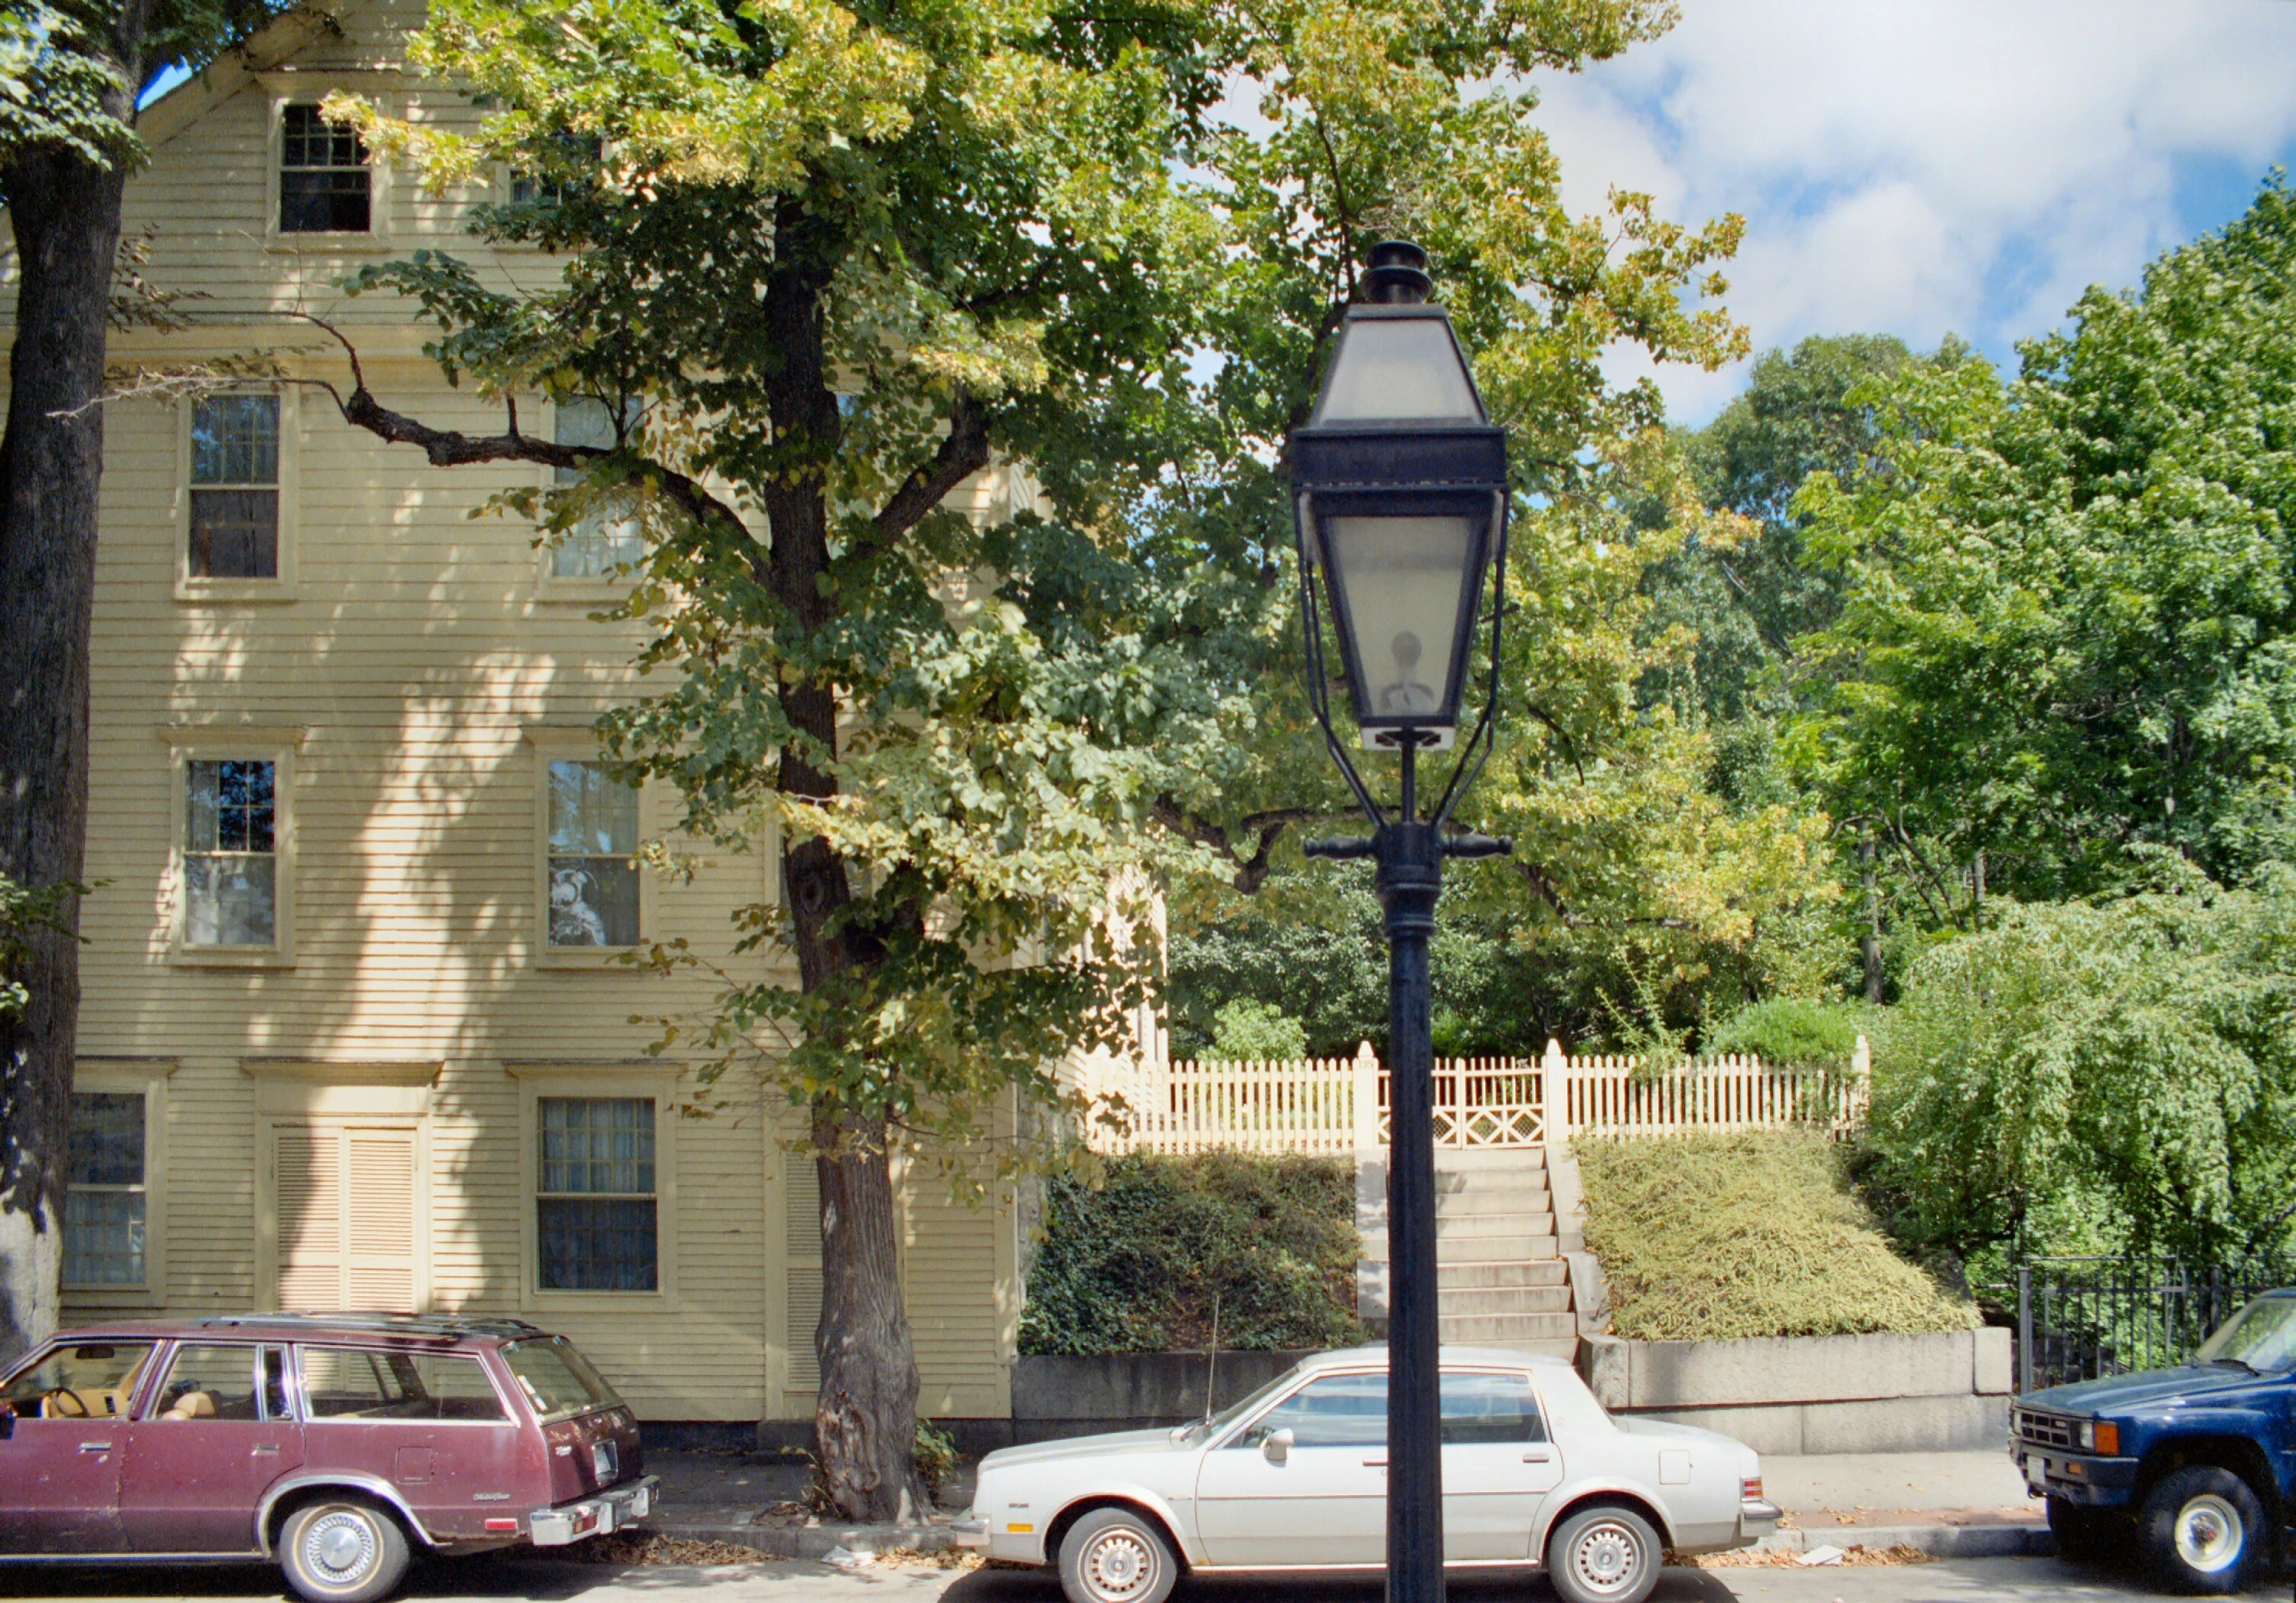 street lamp near two parked cars and a house